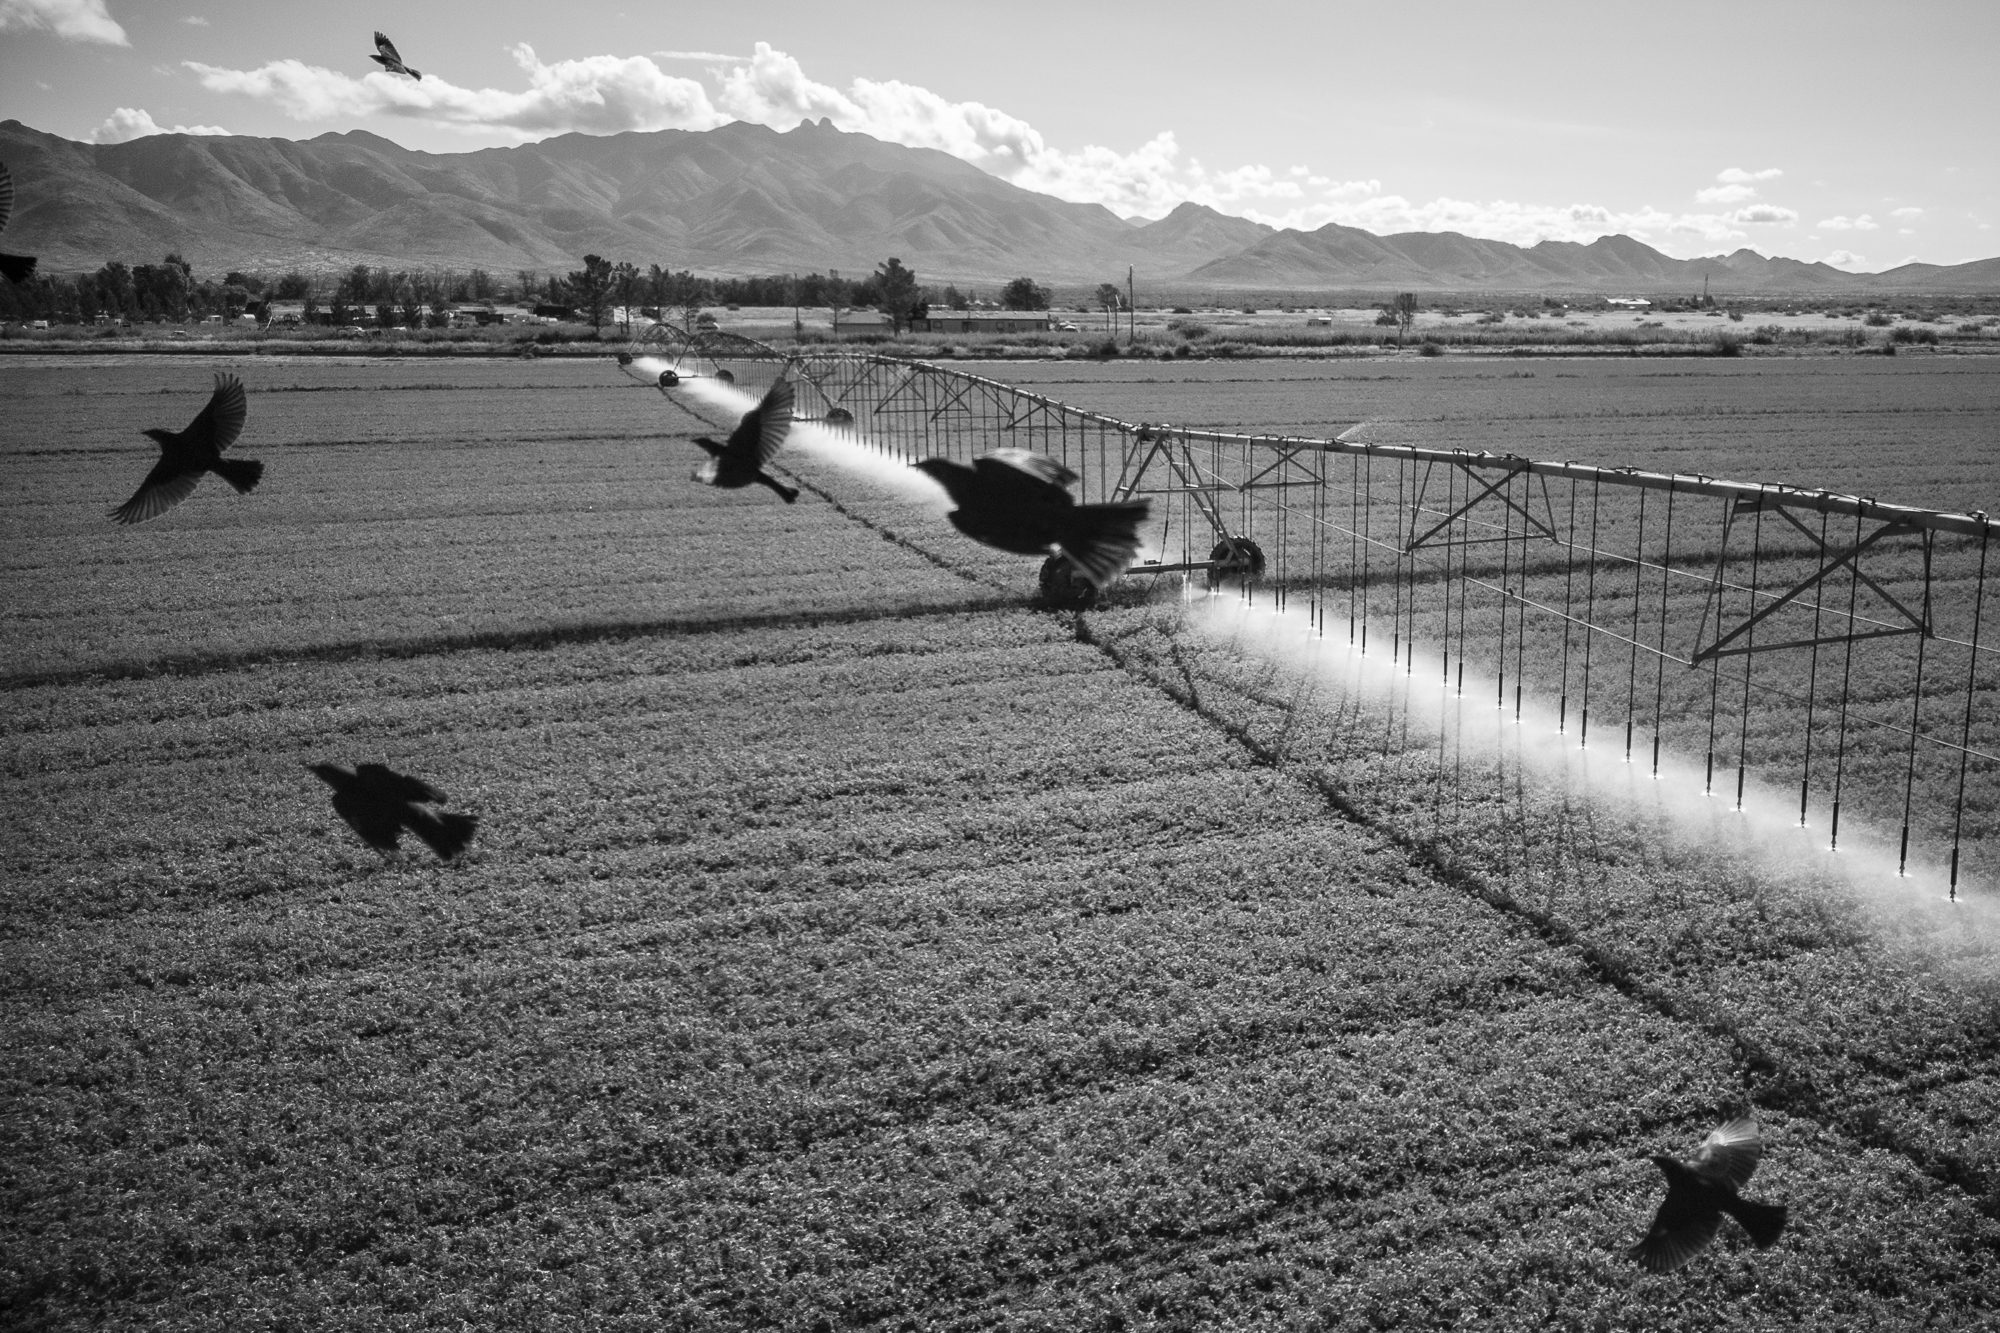 birds fly over a water sprayer on agricultural land